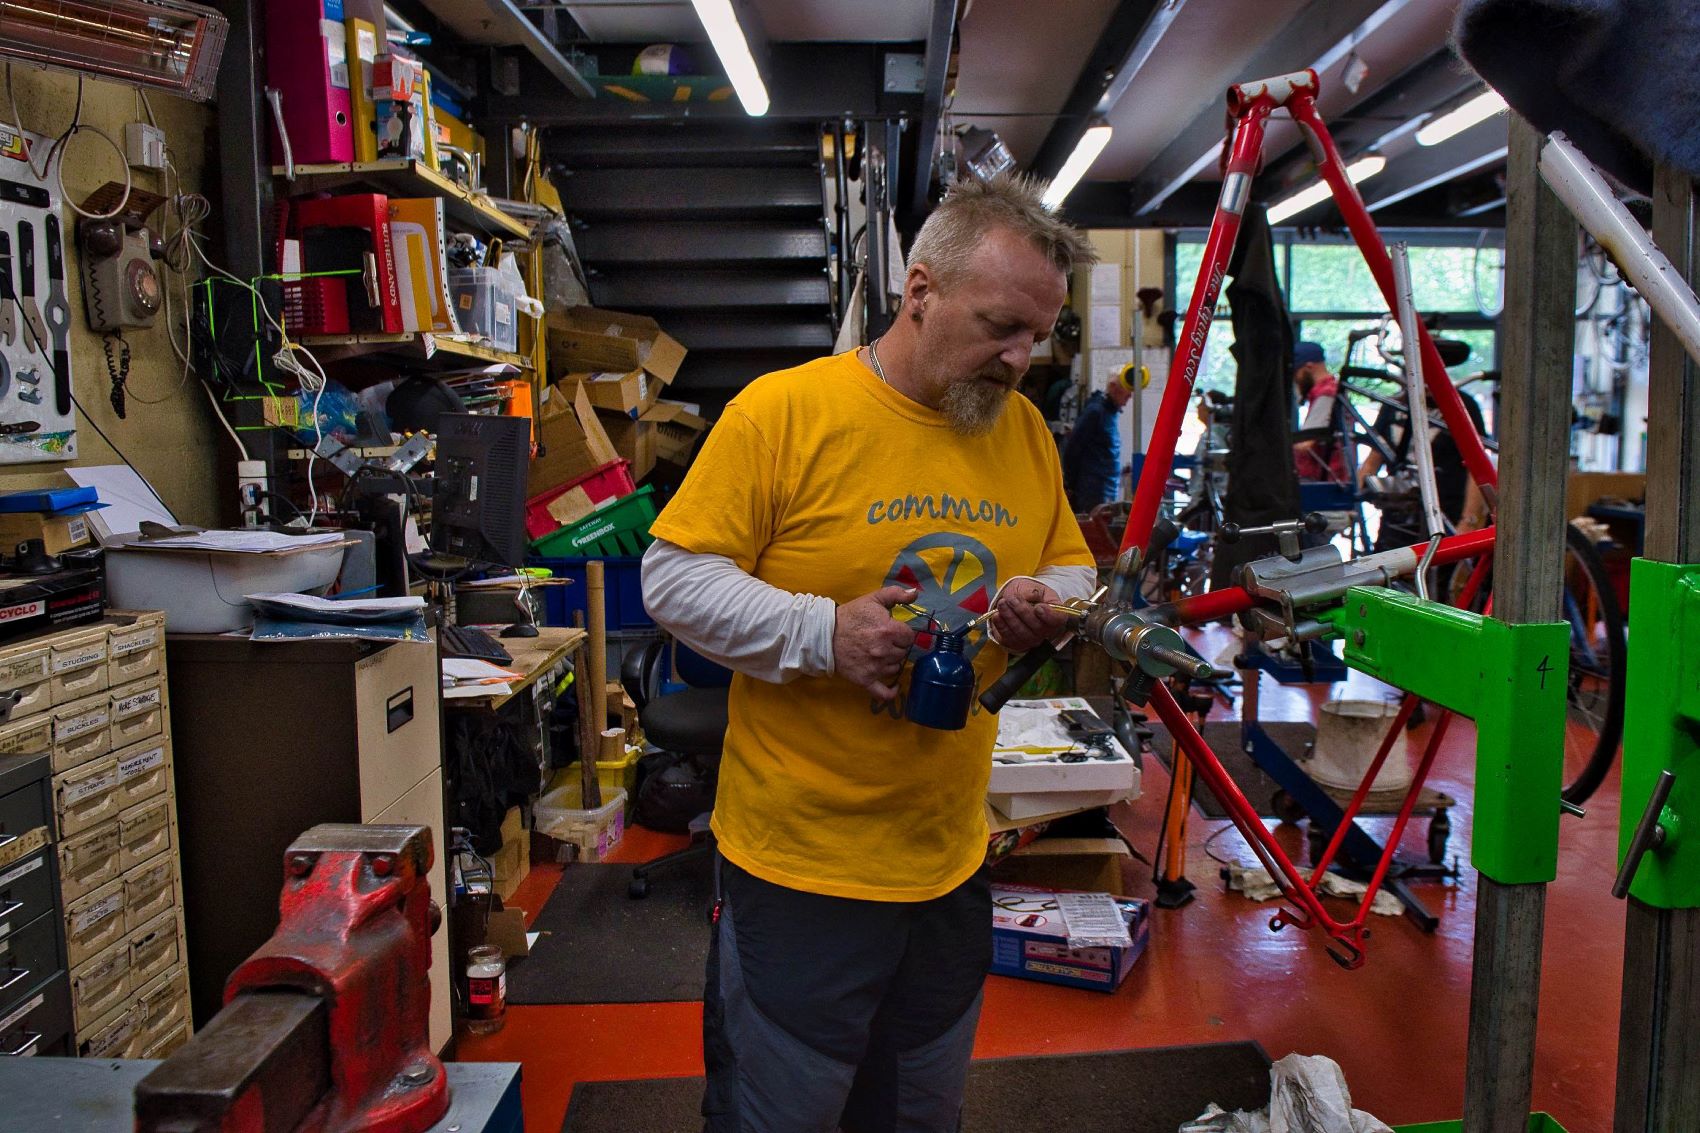 Common Wheel's Mayhill Bike Workshop is a great example of a Social Value initiative